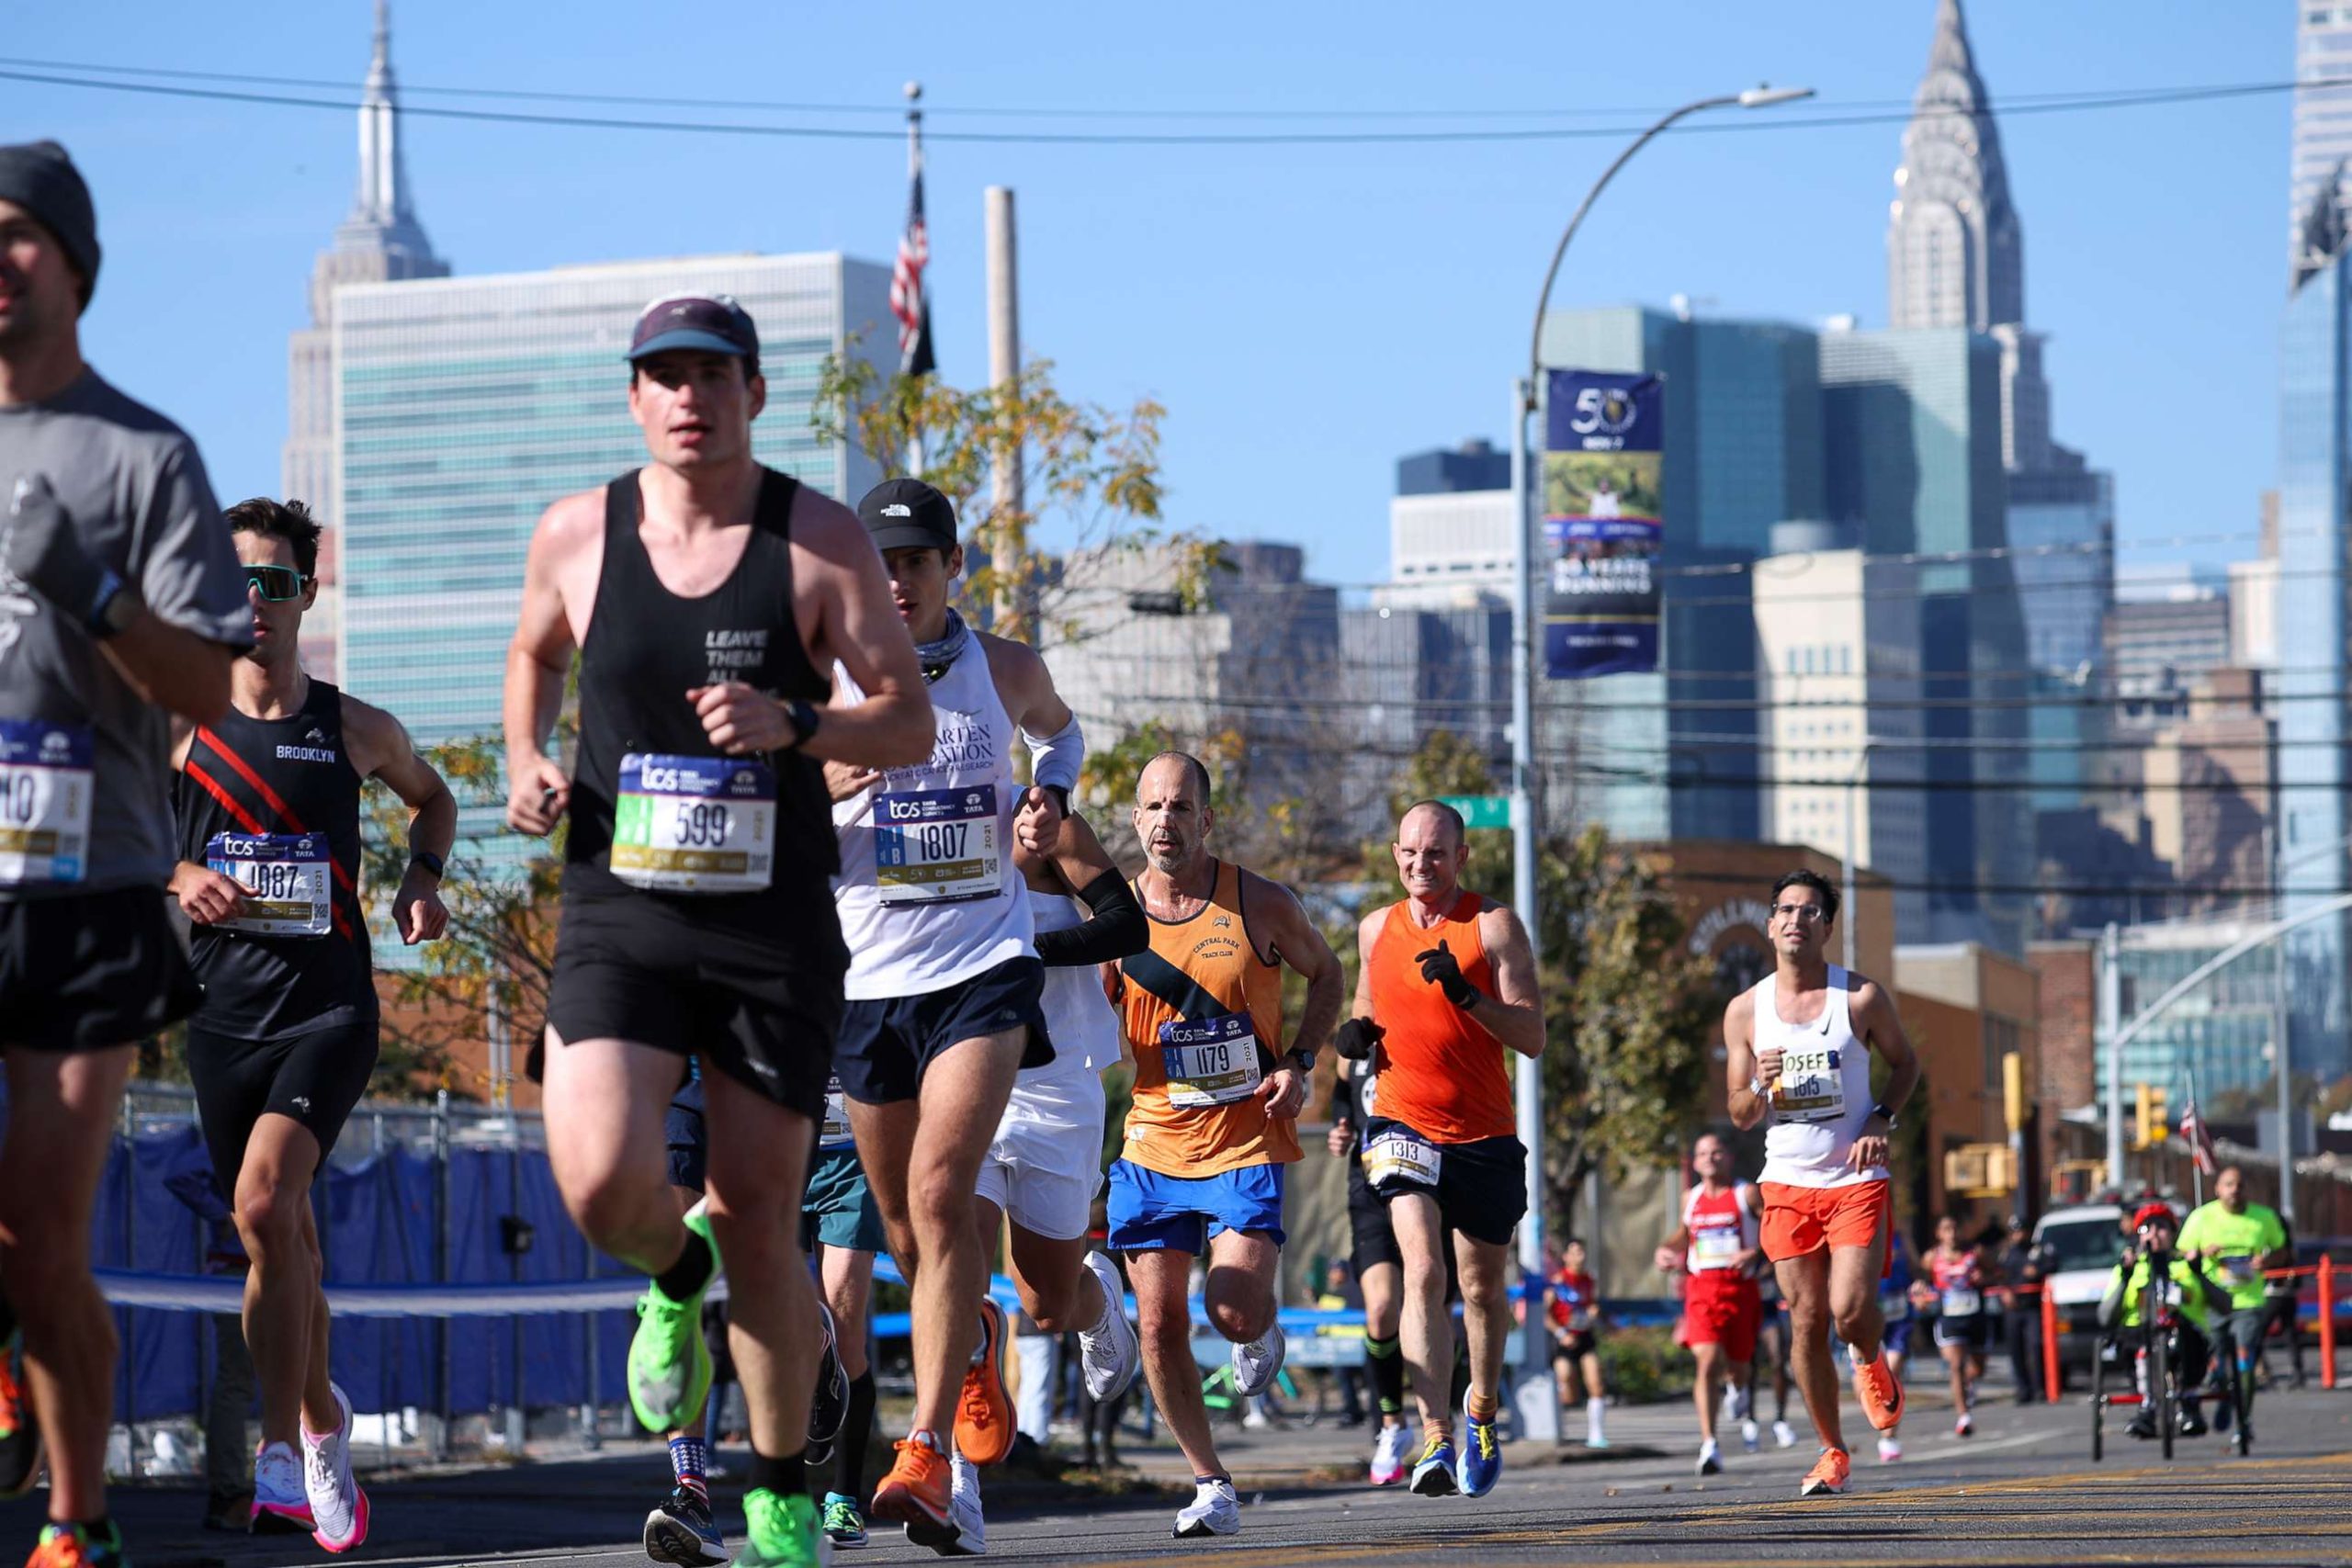 Why Do People Run Marathons for Other People?